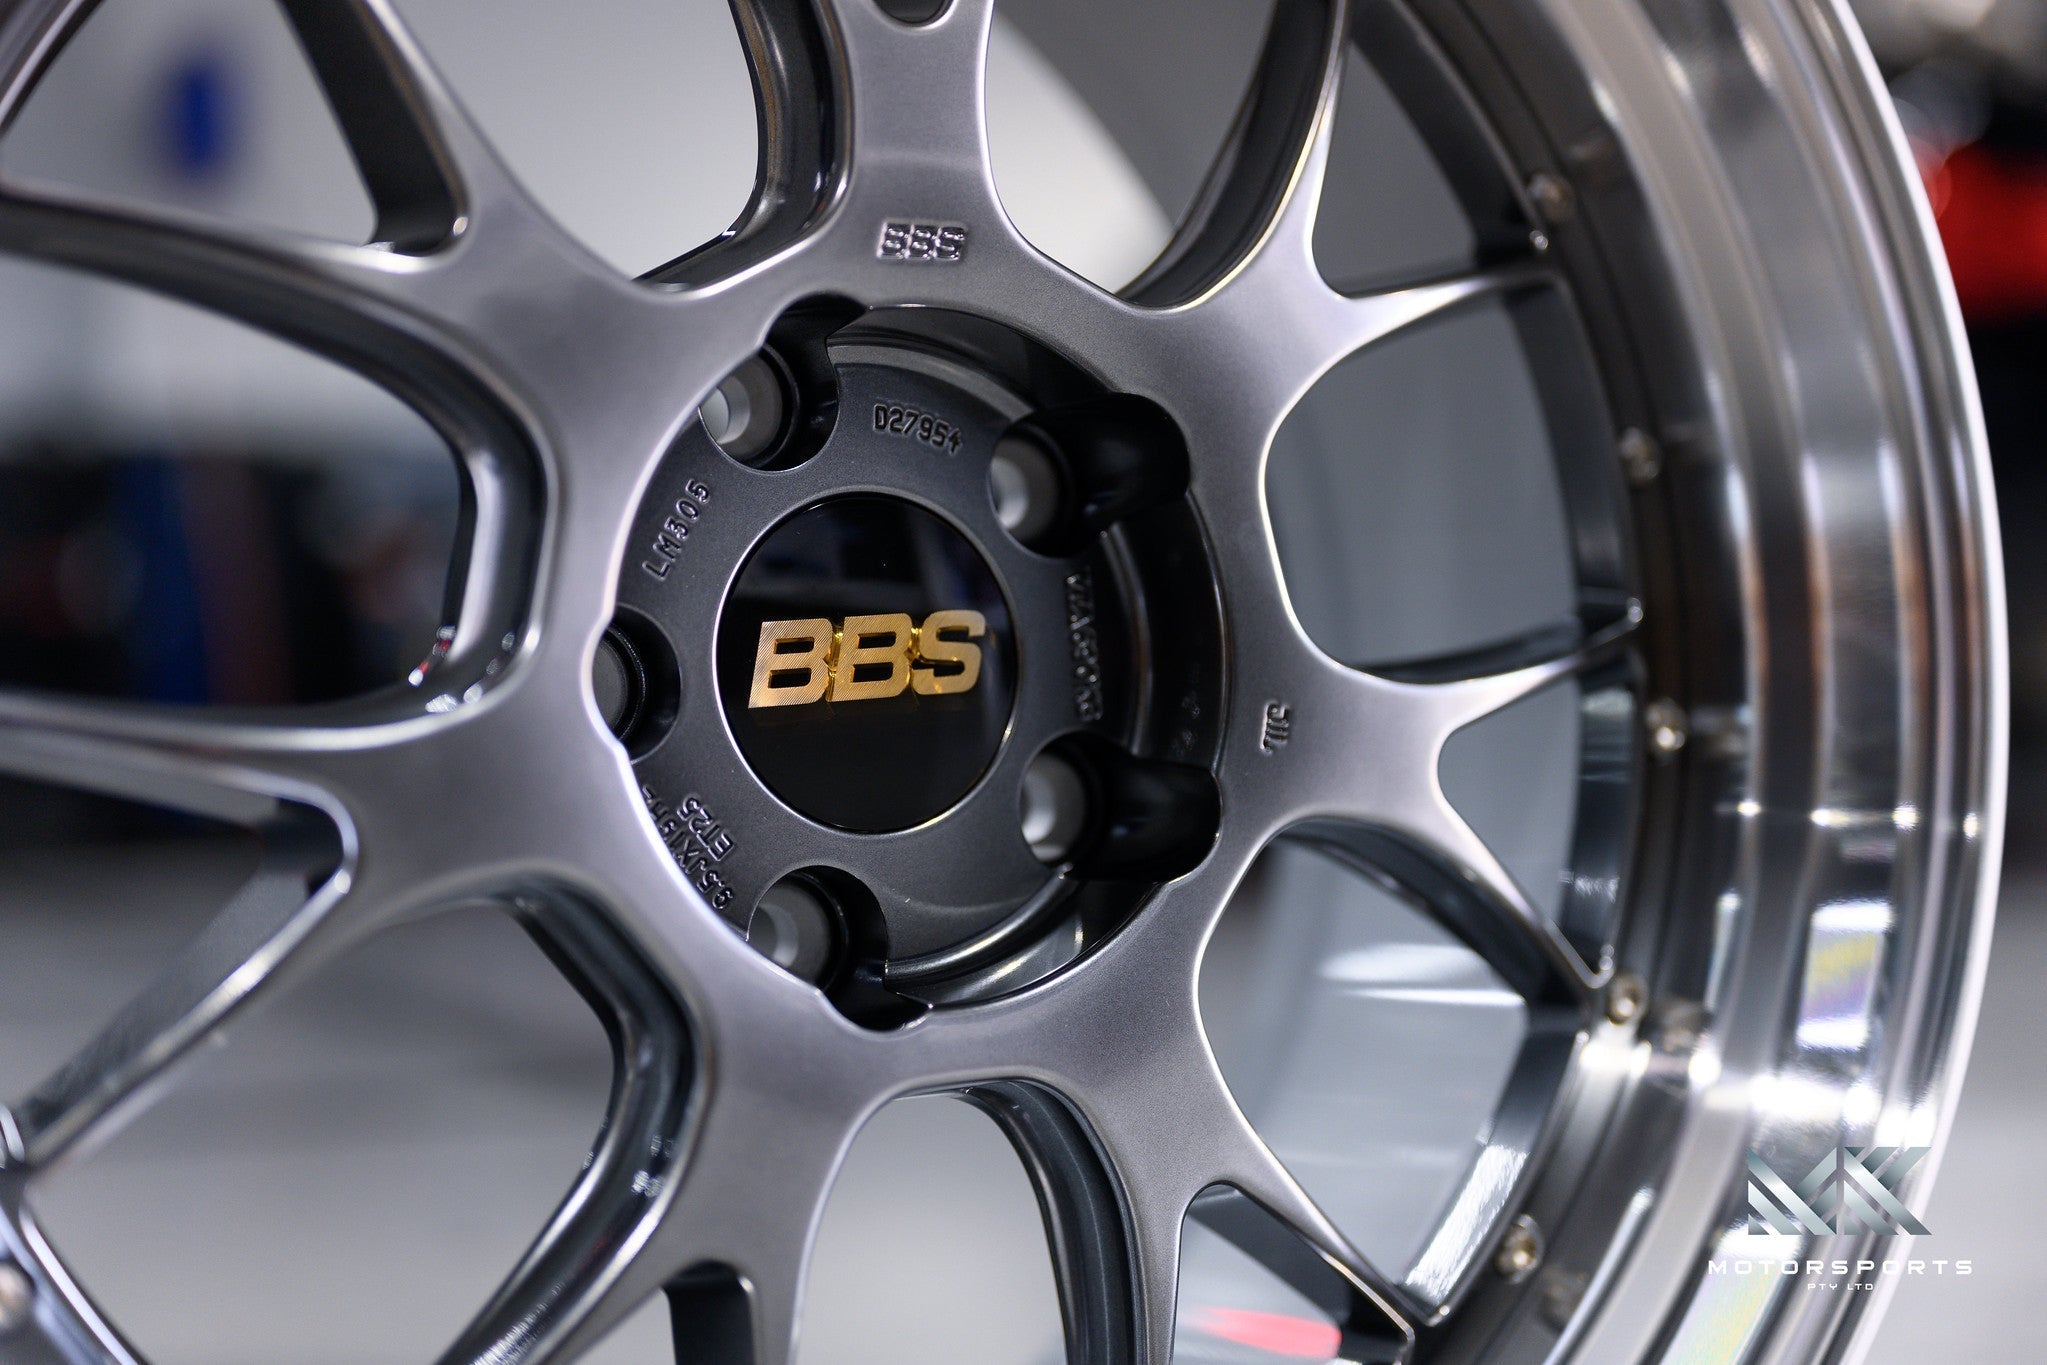 BBS LM-R for F8x M3/M4 - Premium Wheels from BBS Japan - From just $9190.0! Shop now at MK MOTORSPORTS